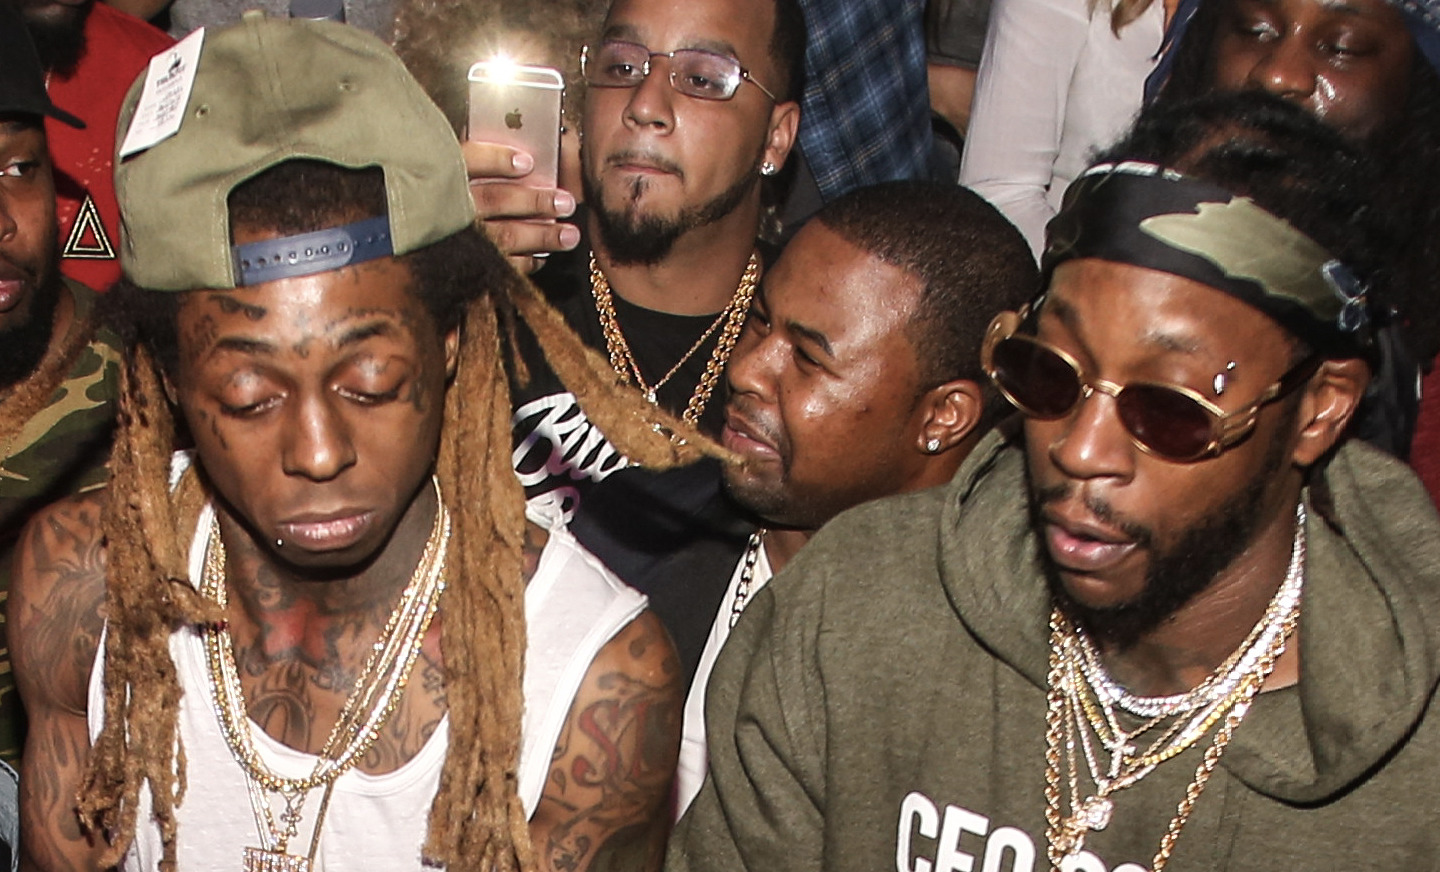 2 Chainz Says Lil Wayne Collab Album “COLLEGROVE 2” Is Coming Very Soon